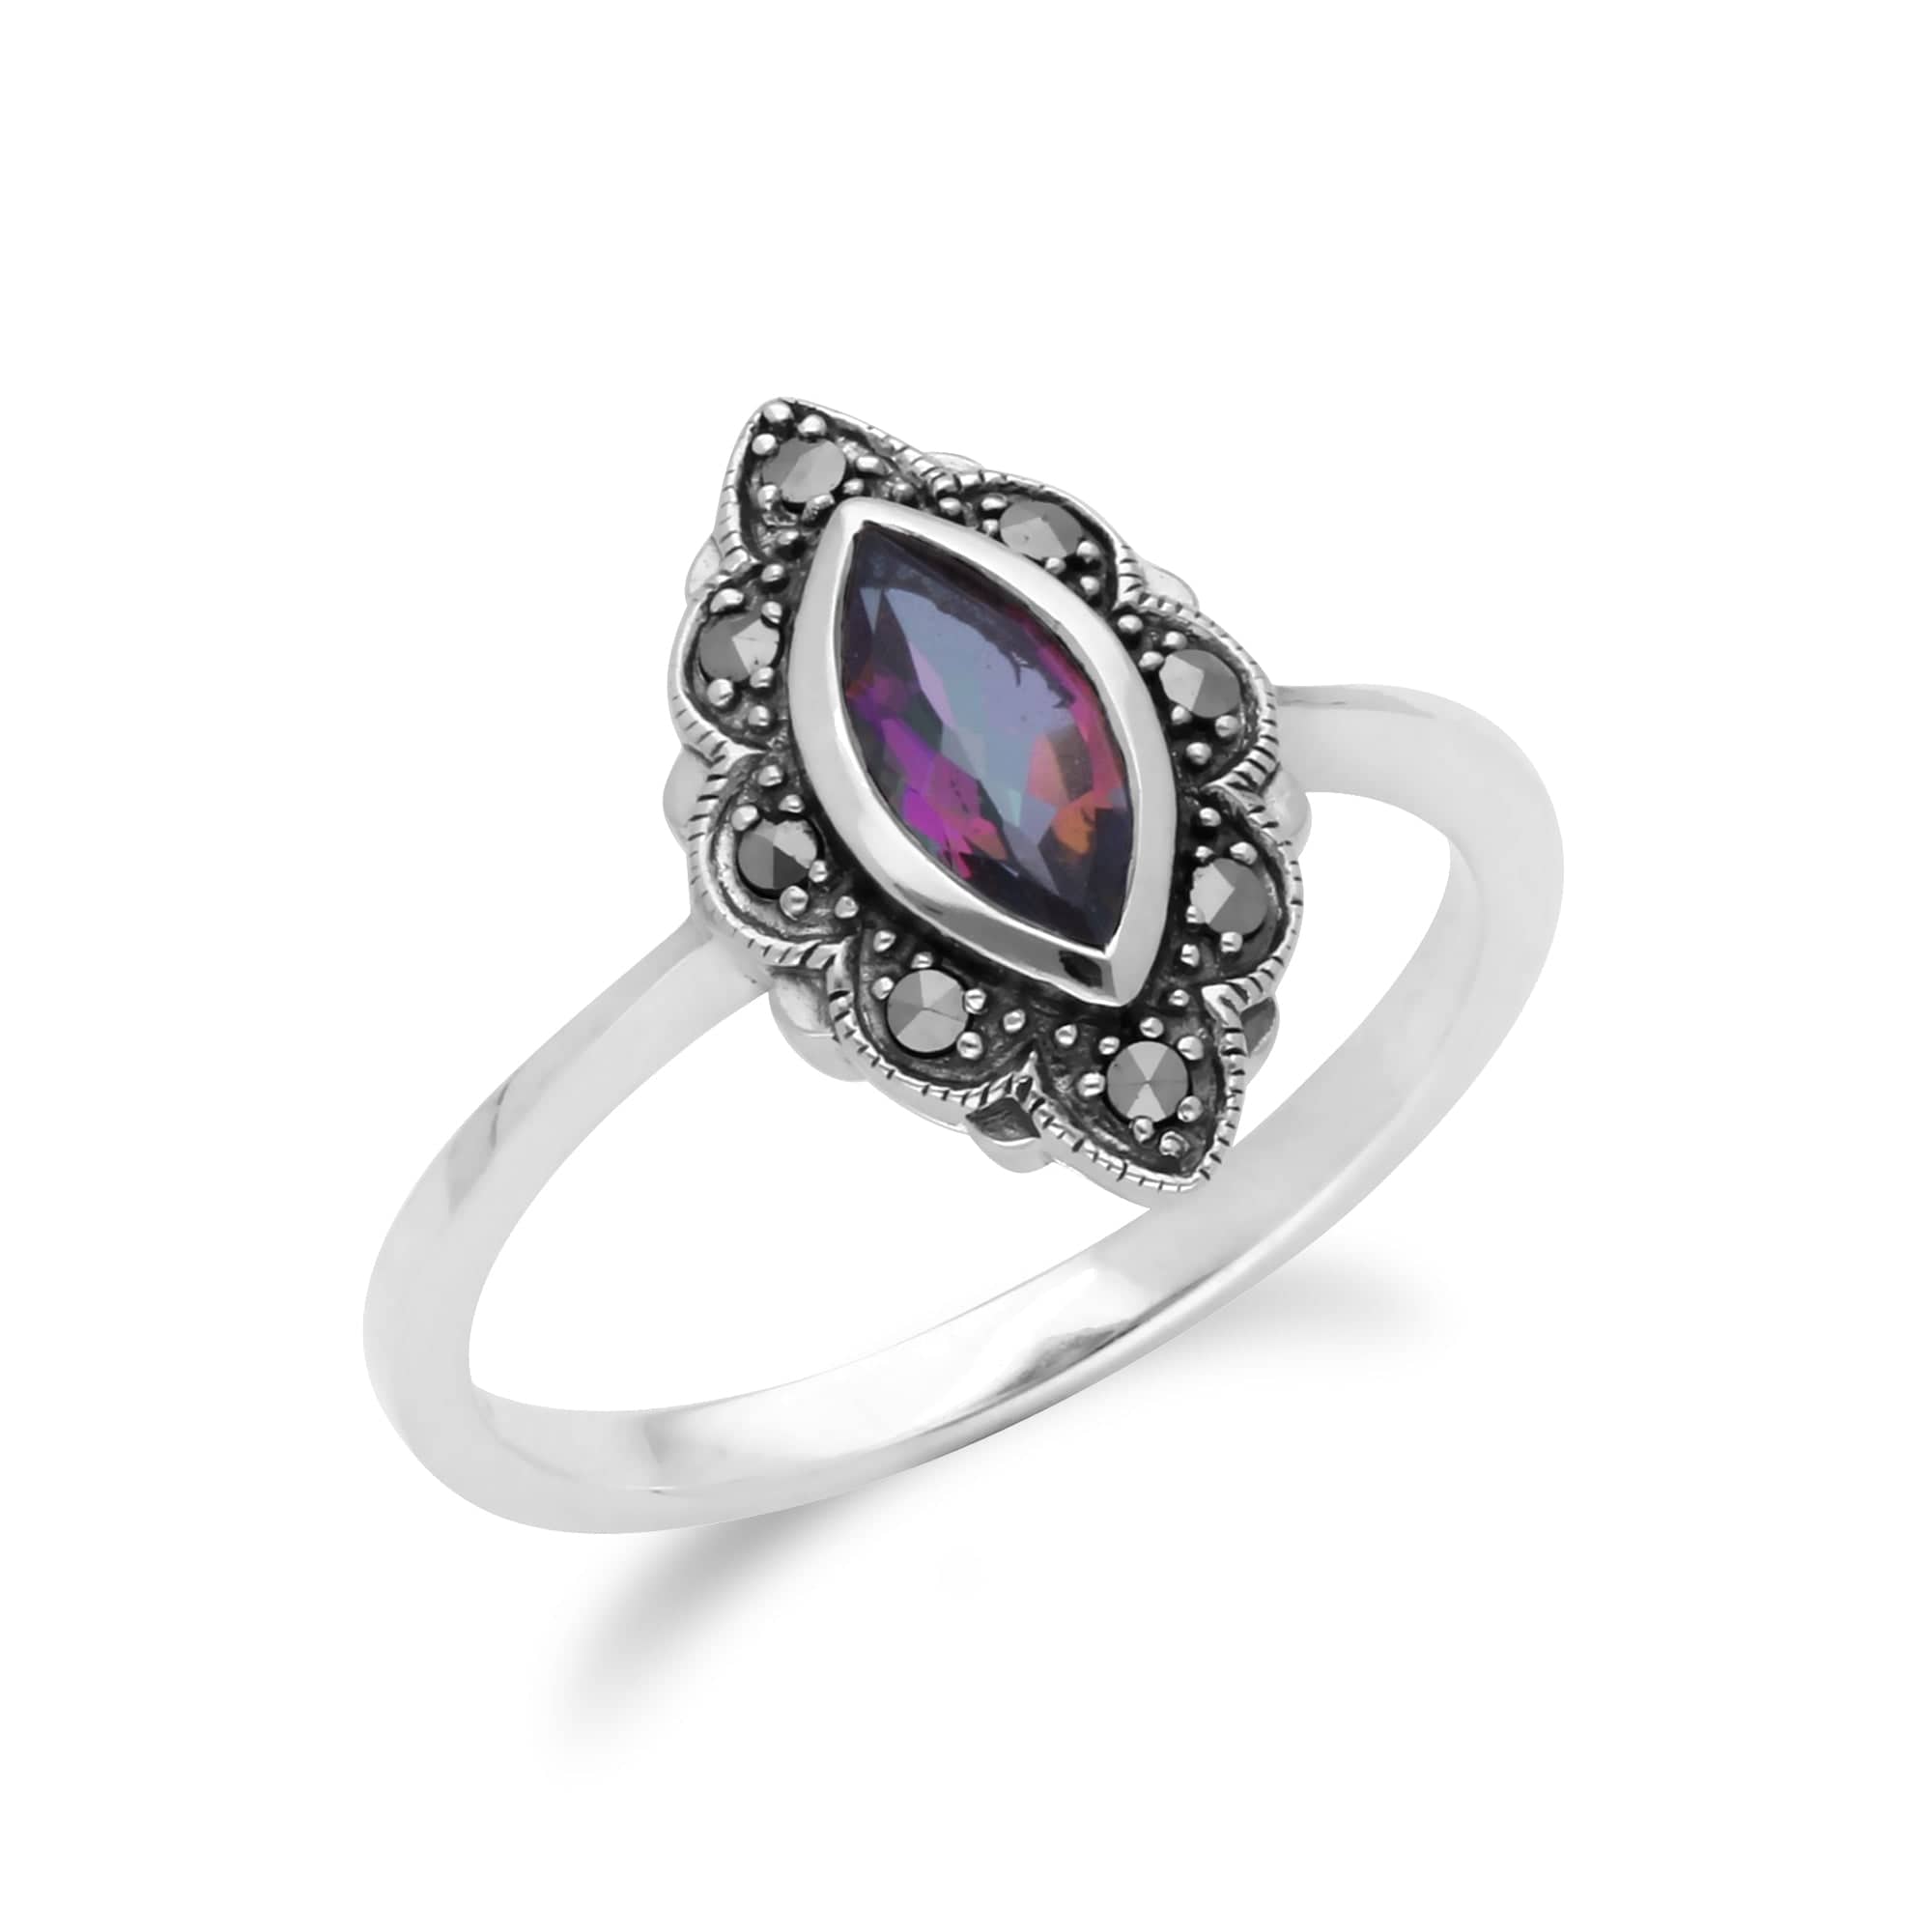 214R597204925 Art Nouveau Marquise Mystic Topaz & Marcasite Leaf Ring in 925 Sterling Silver 2